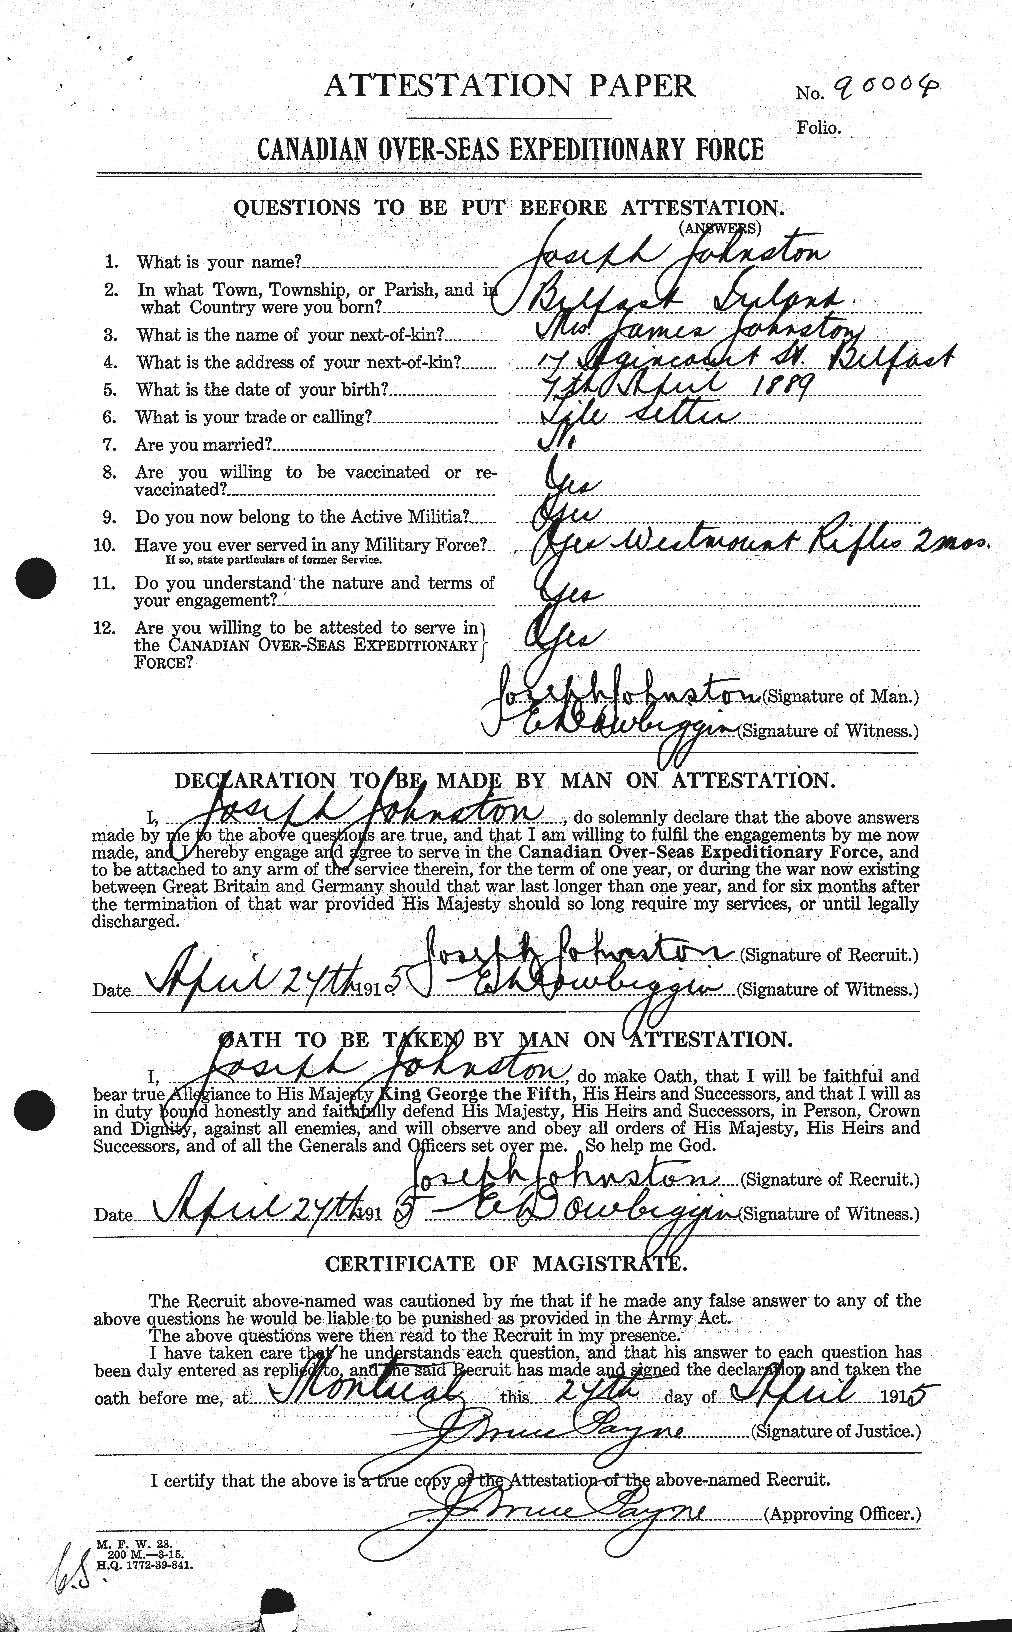 Personnel Records of the First World War - CEF 422896a